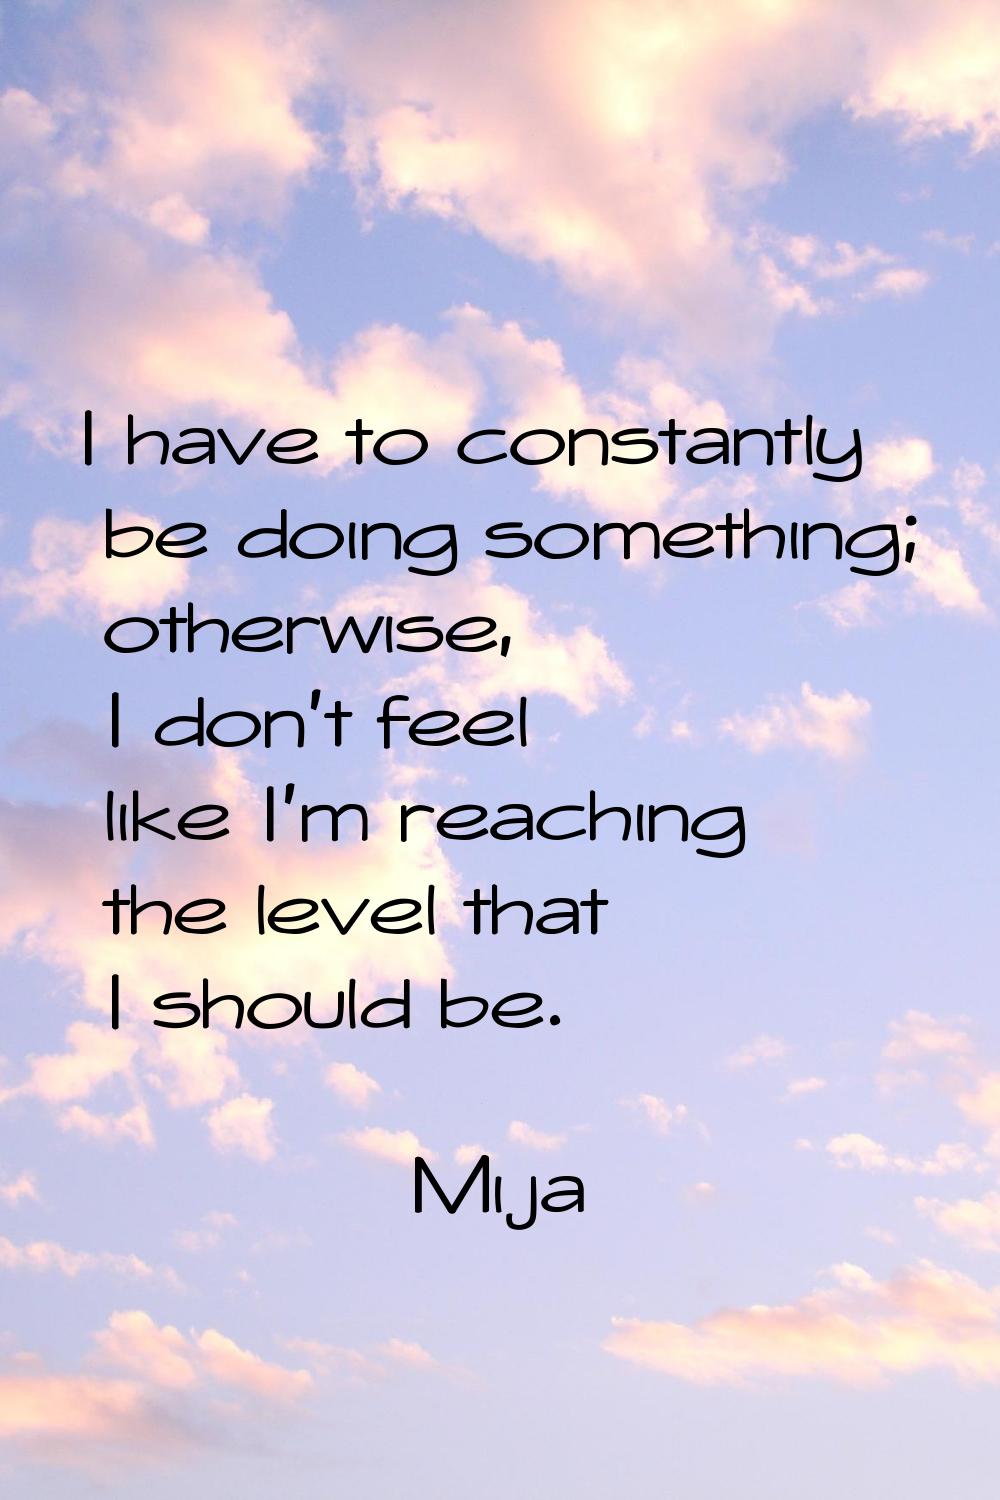 I have to constantly be doing something; otherwise, I don't feel like I'm reaching the level that I